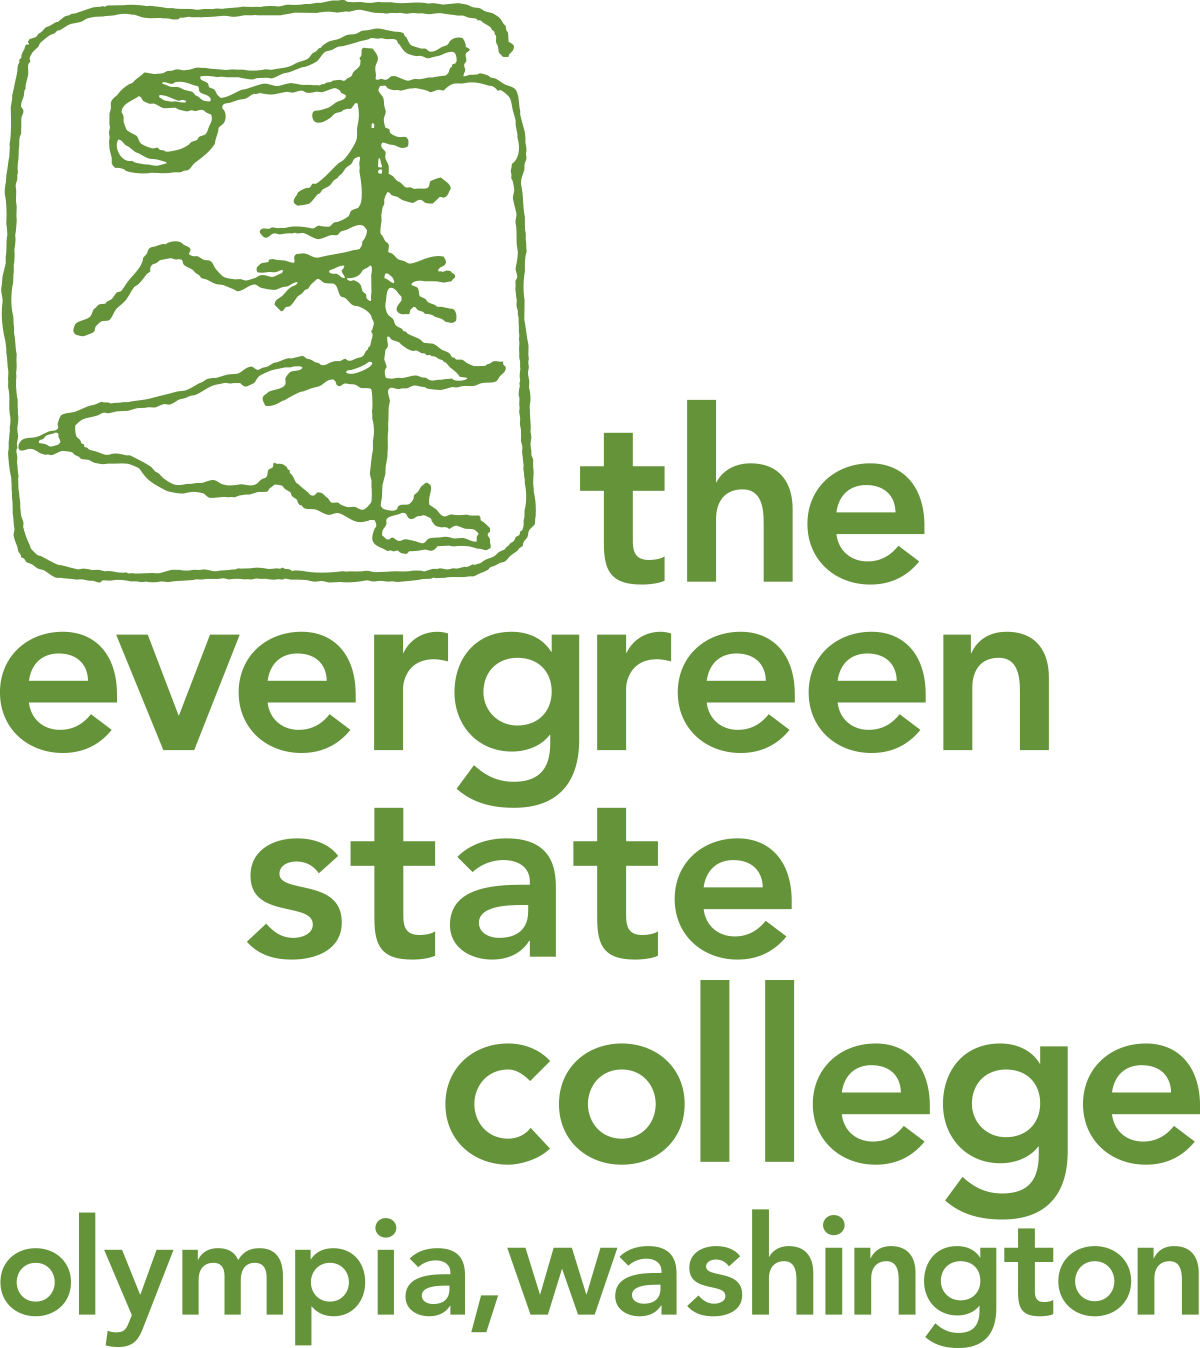 evergreen-stacked-tree-oly-green.png